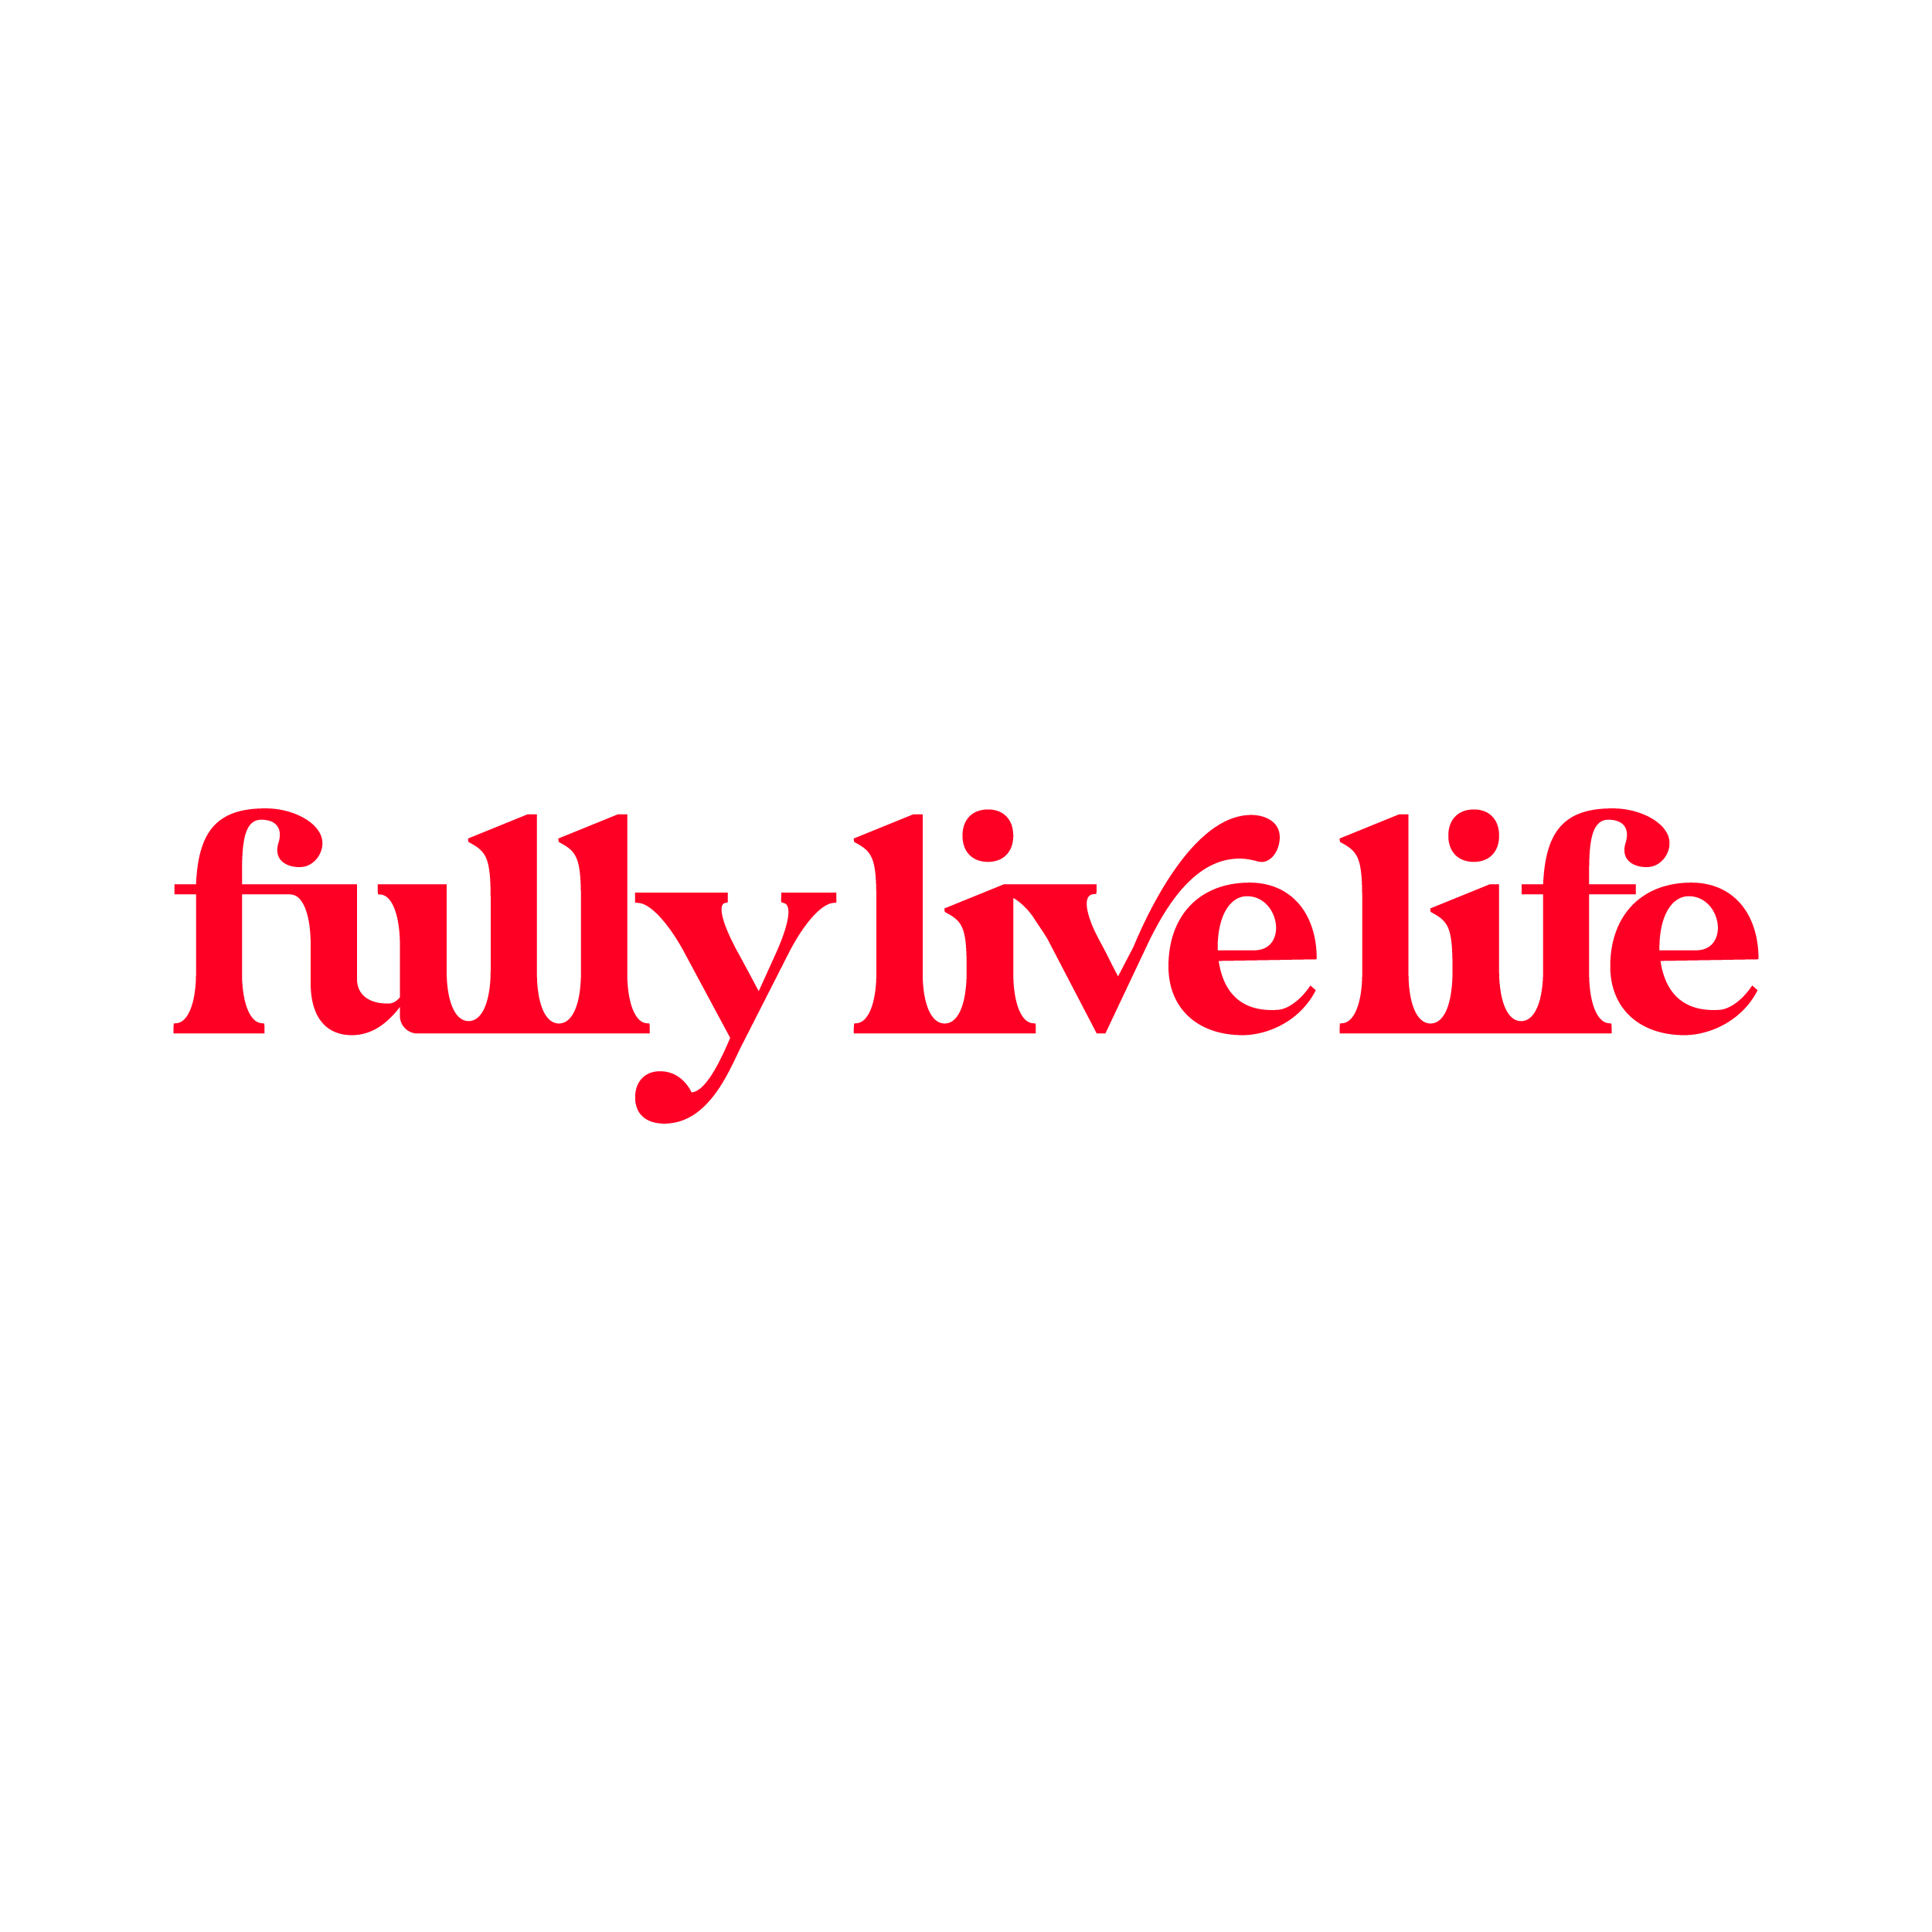 Fully Live Life logo design by logo designer St. Germain Design Co. for your inspiration and for the worlds largest logo competition